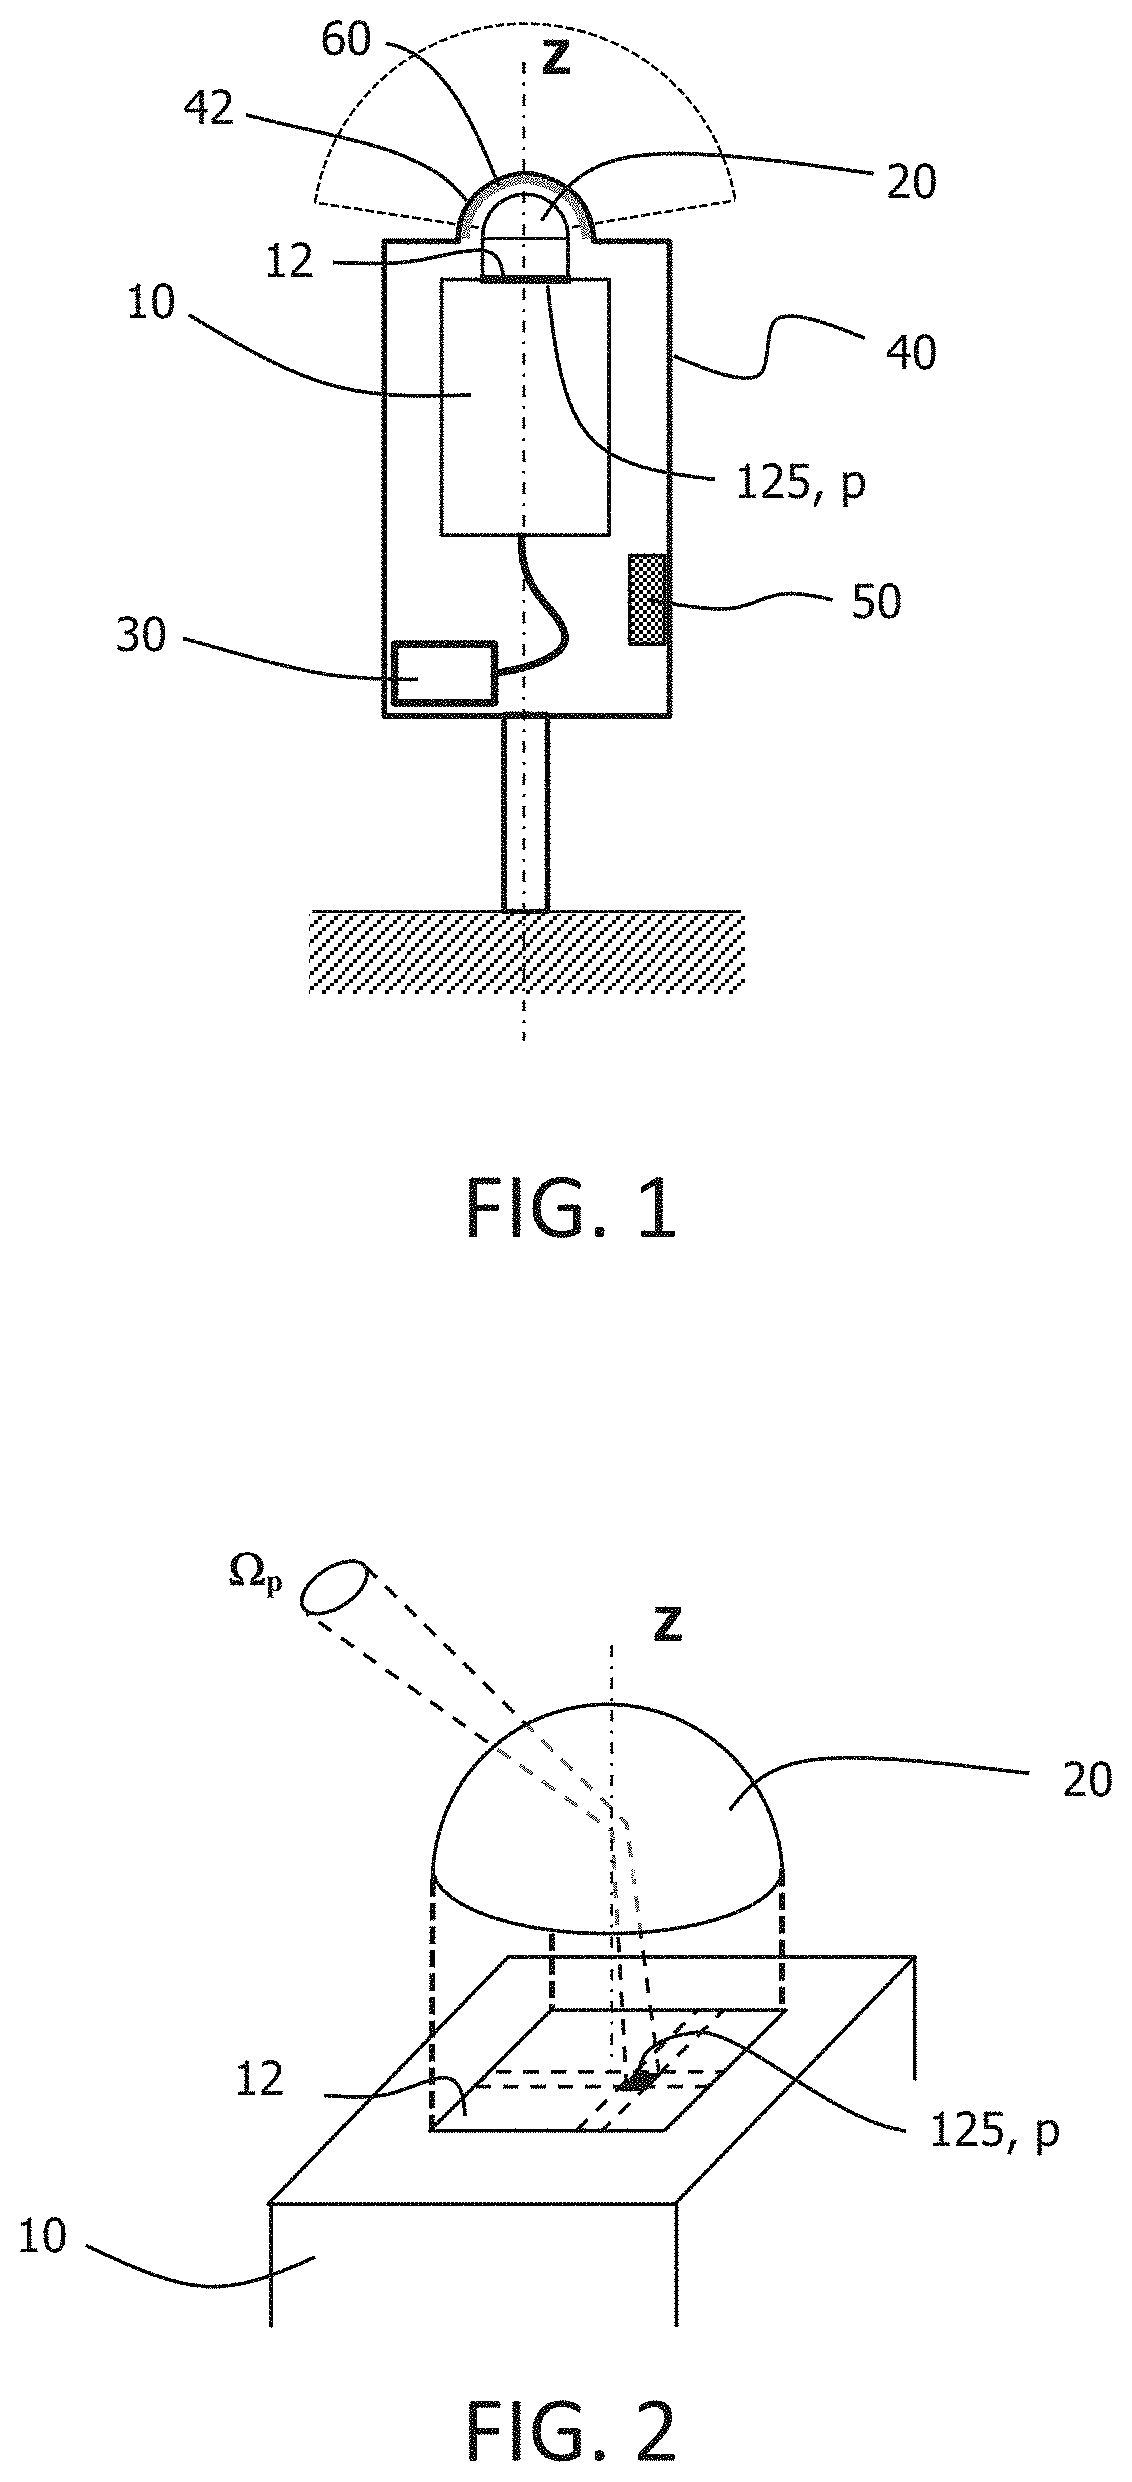 System for measuring components of solar radiation